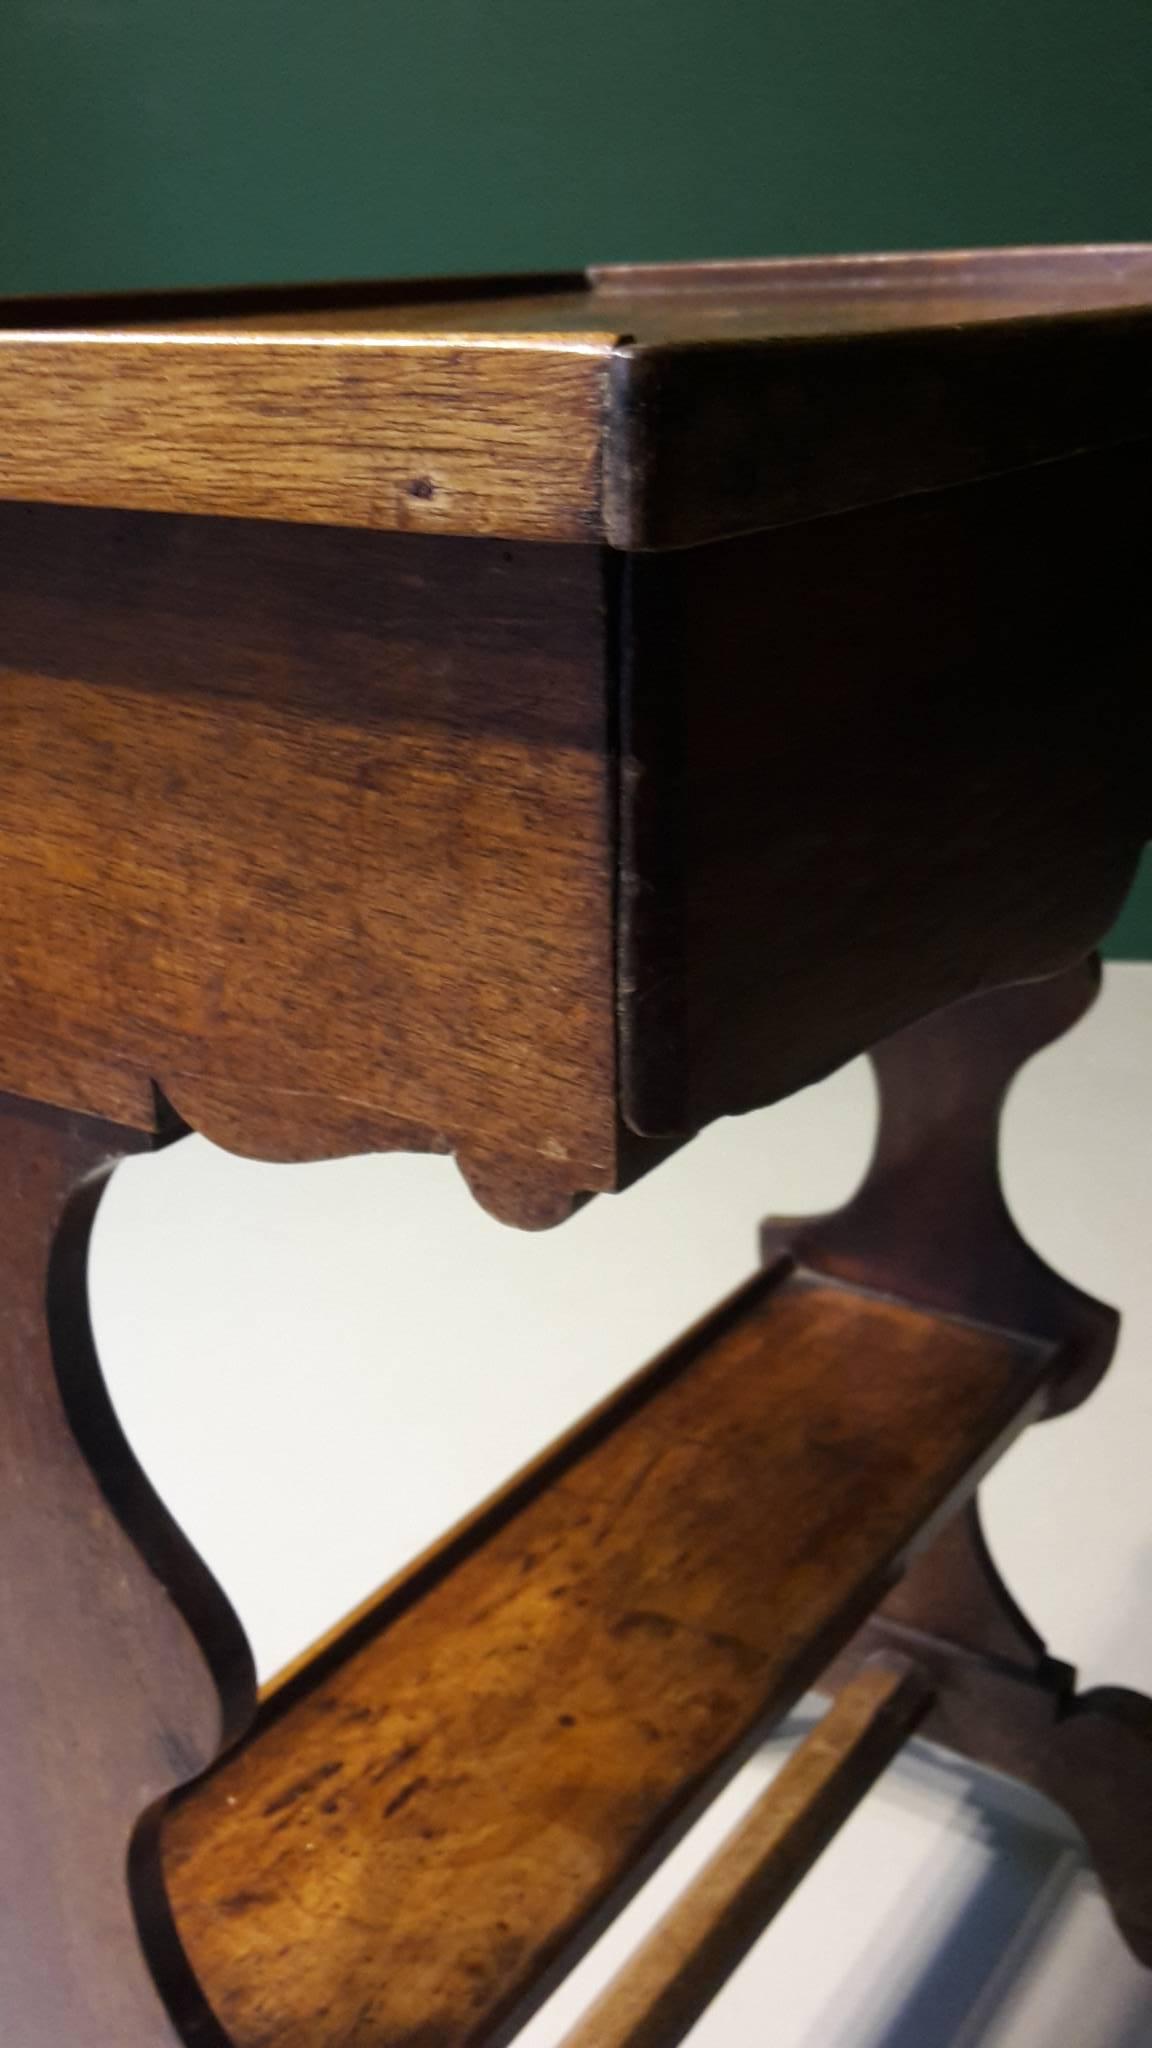 Late 19th century French side table with drawer made of walnut.